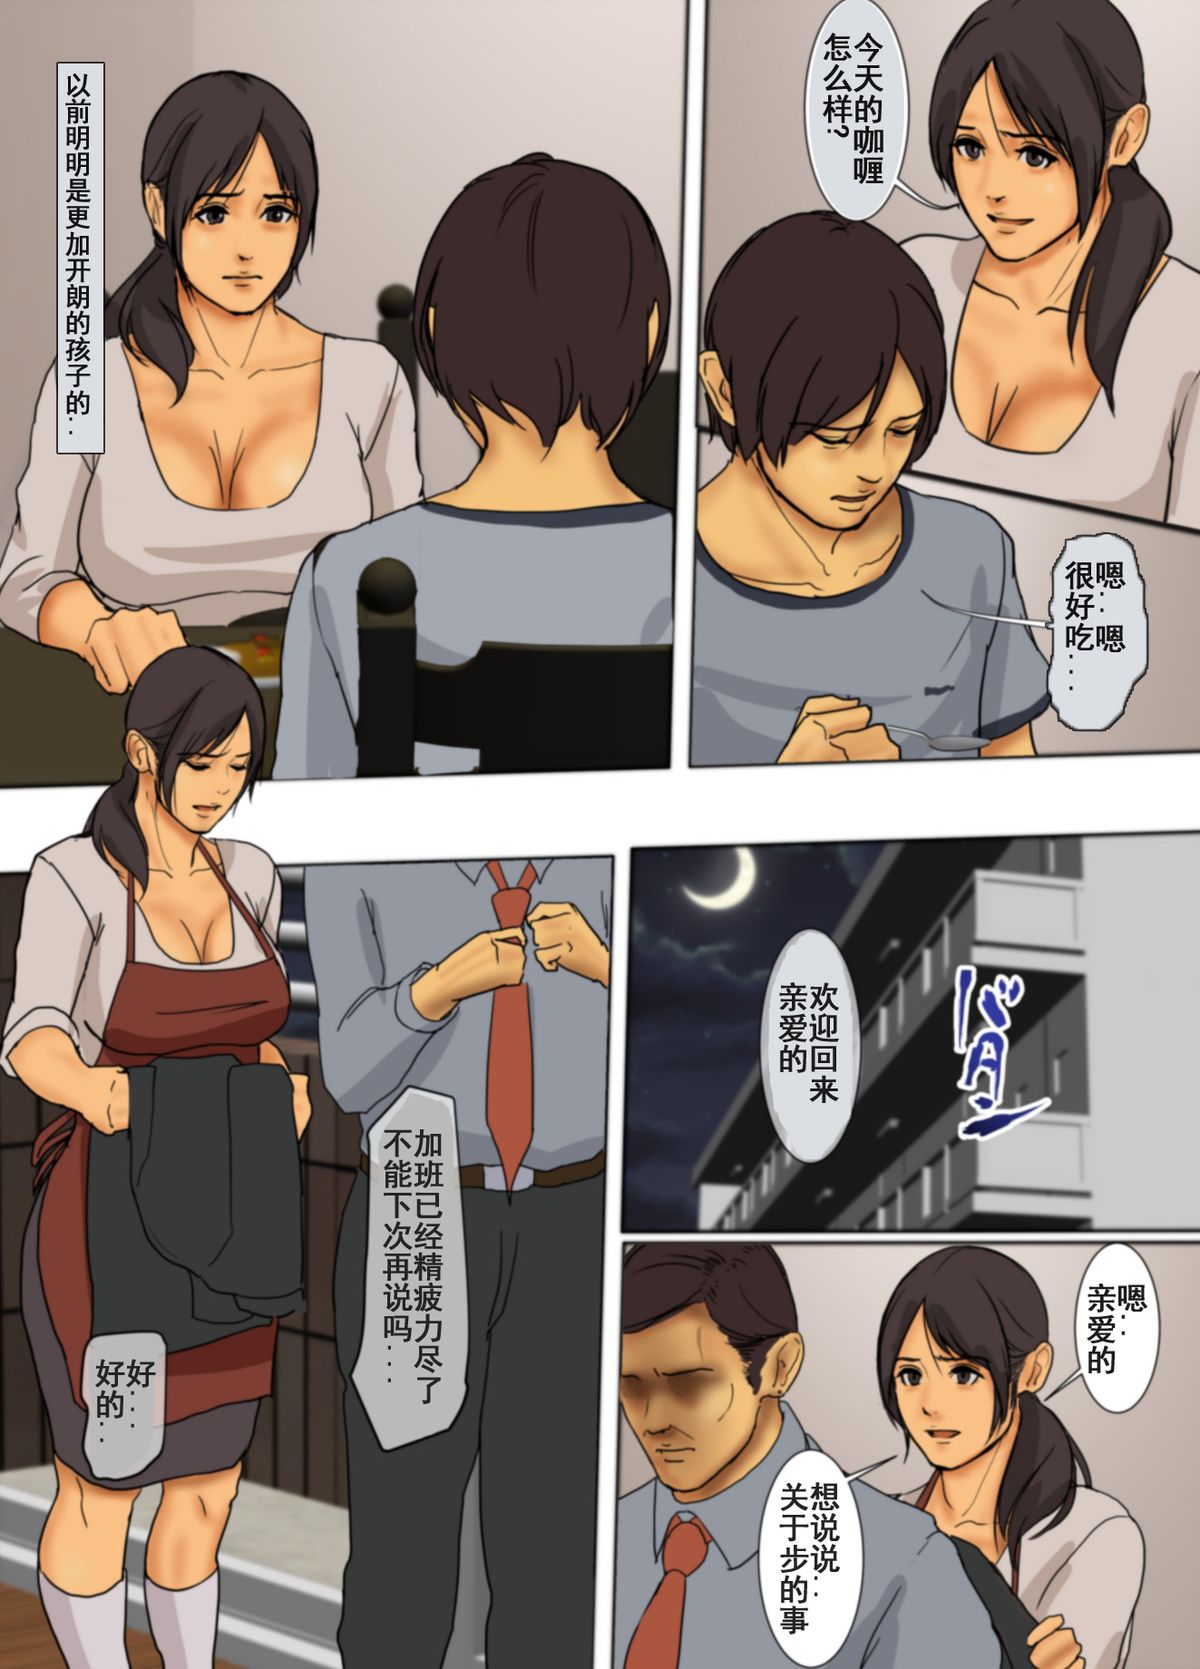 [Yojouhan Shobou] Ikenie no Haha [Chinese] [LeVeL個人漢化] [Ongoing] [Updated] page 4 full